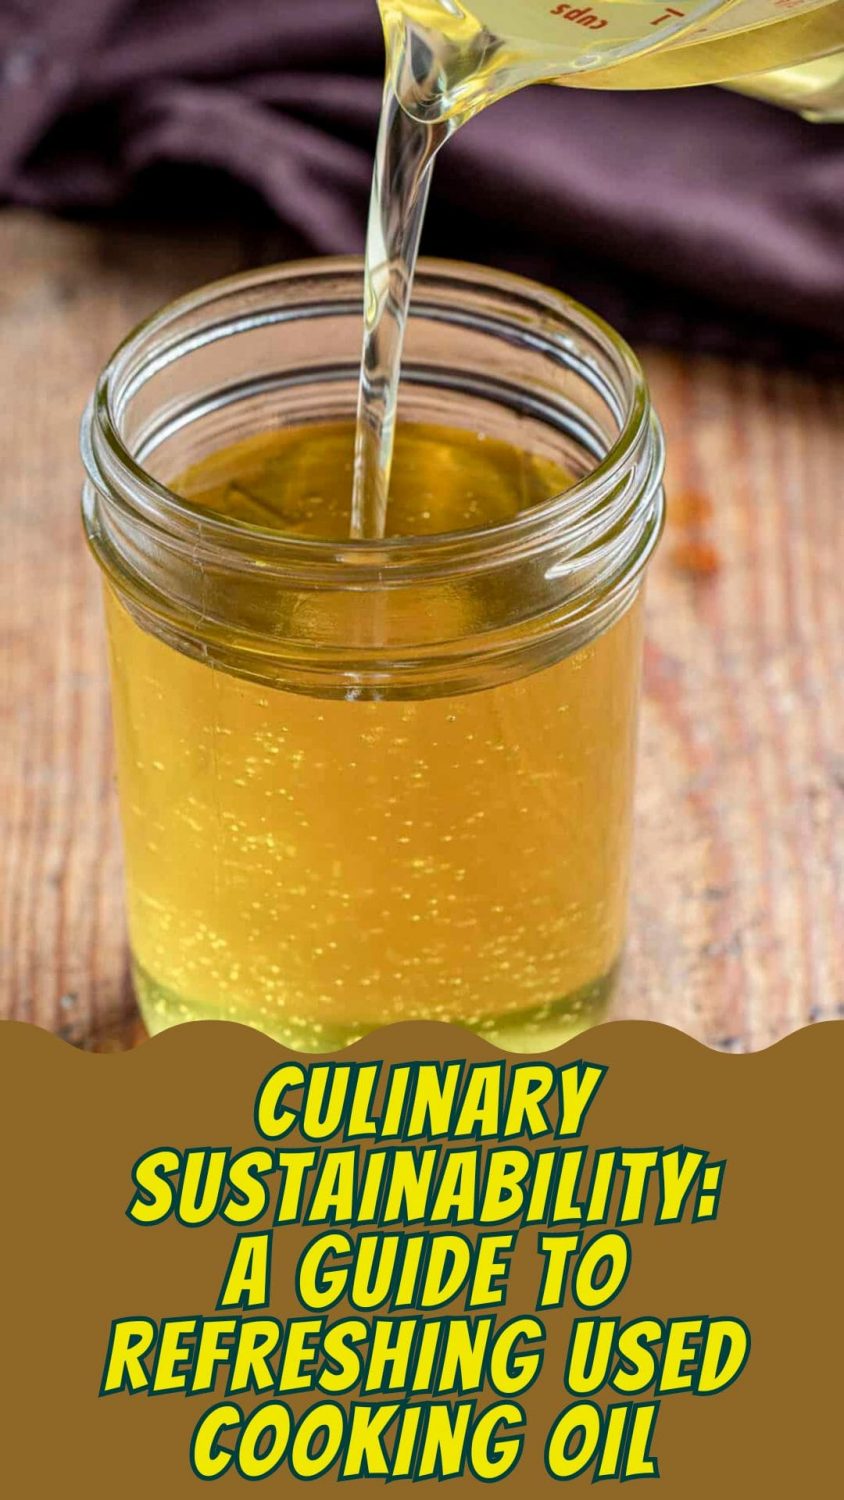 Culinary Sustainability: A Guide to Refreshing Used Cooking Oil